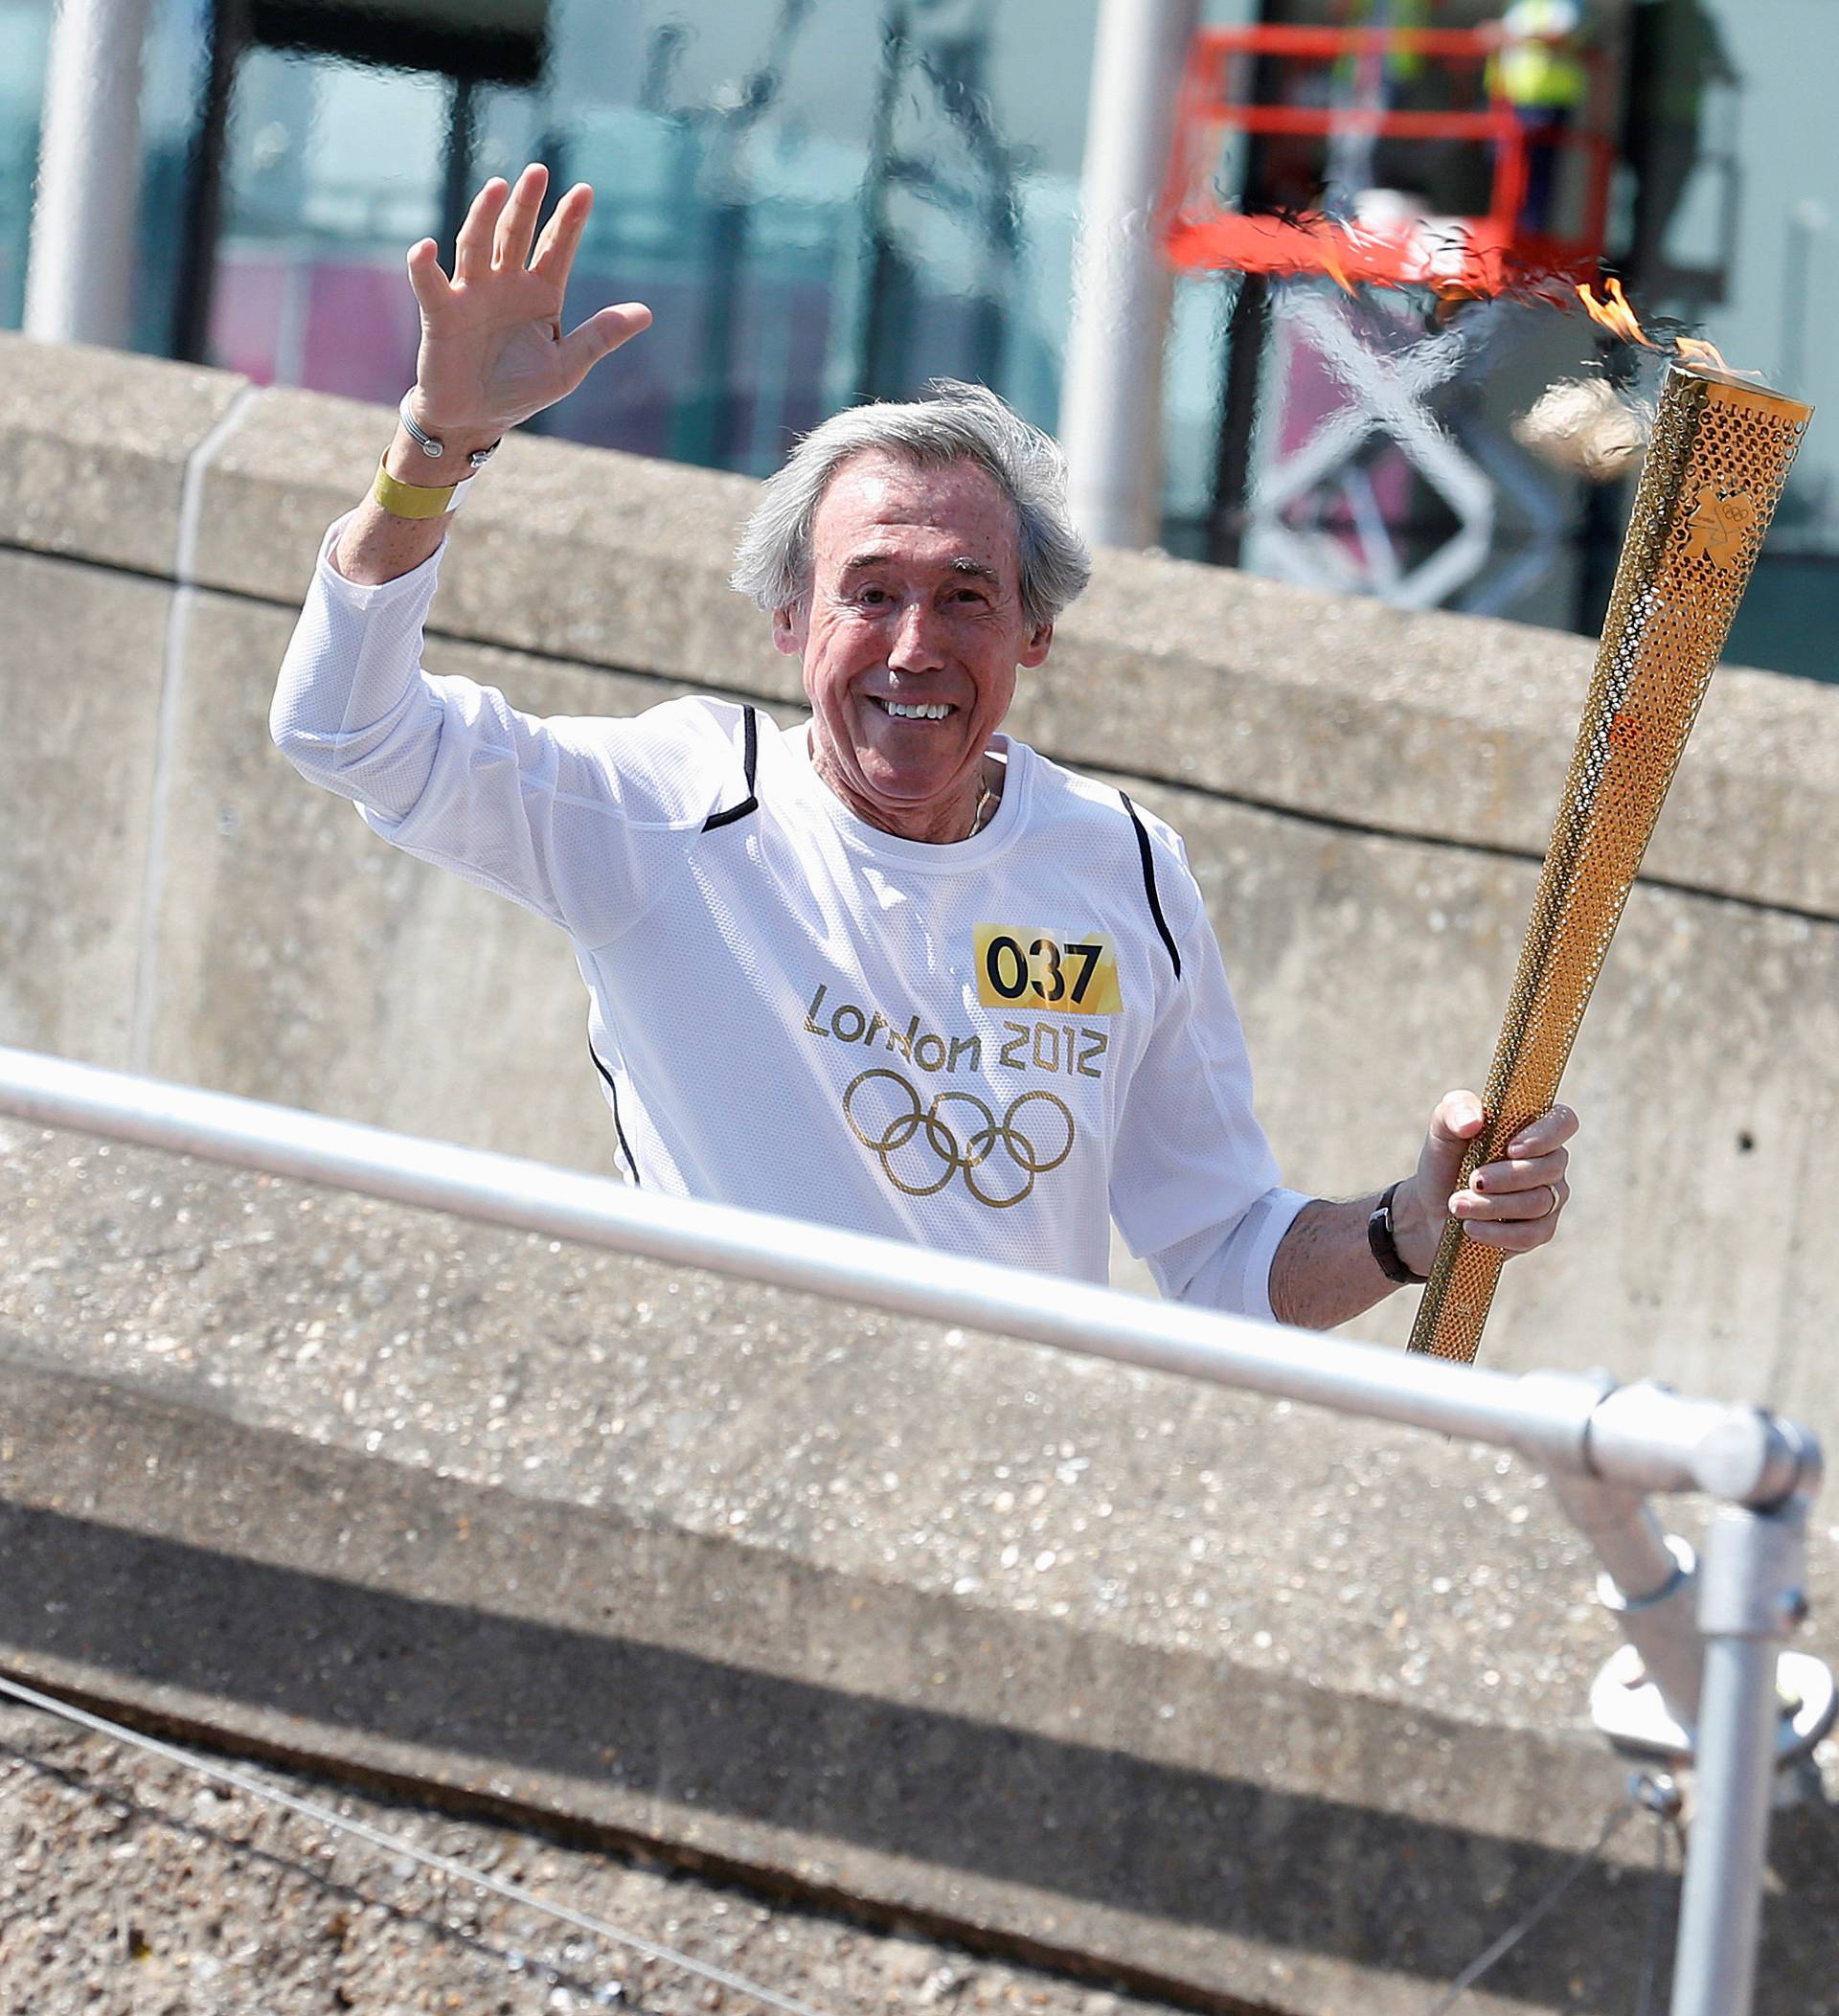 FILE PHOTO: British soccer player Banks, who was goalkeeper for England in the 1966 World Cup, runs with the London 2012 Olympic torch outside Wembley Stadium in northwest London